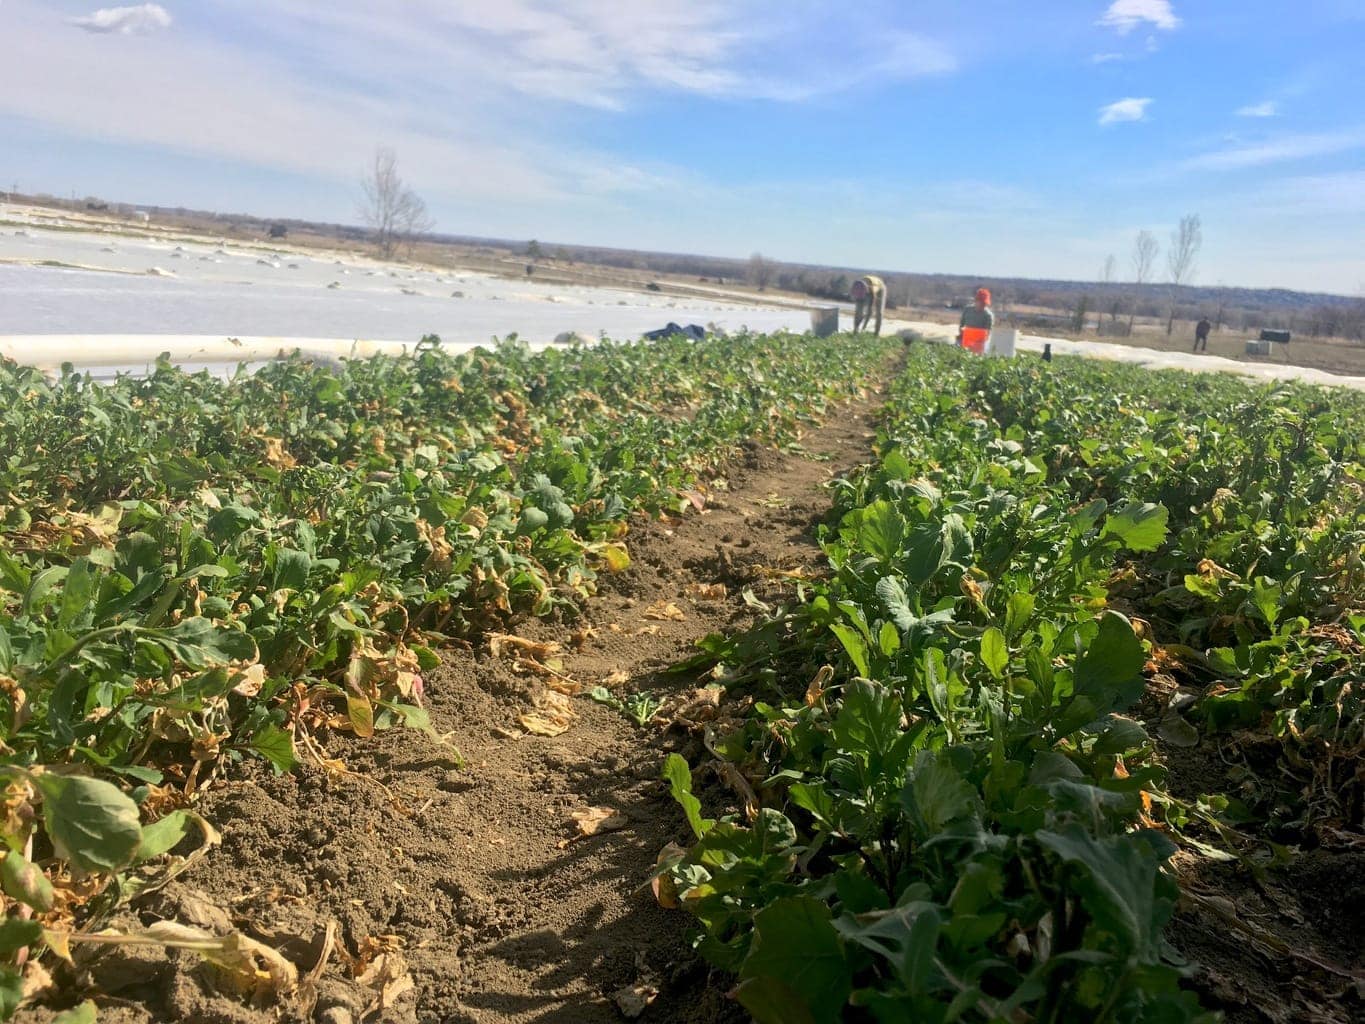 Arugula is a mainstay on Black Cat Farm, which supplies biodynamic and organic certified produce and meat to Black Cat Bistro and Bramble & Hare restaurant. It is the most ambitious farm-to-table operation in the United States.